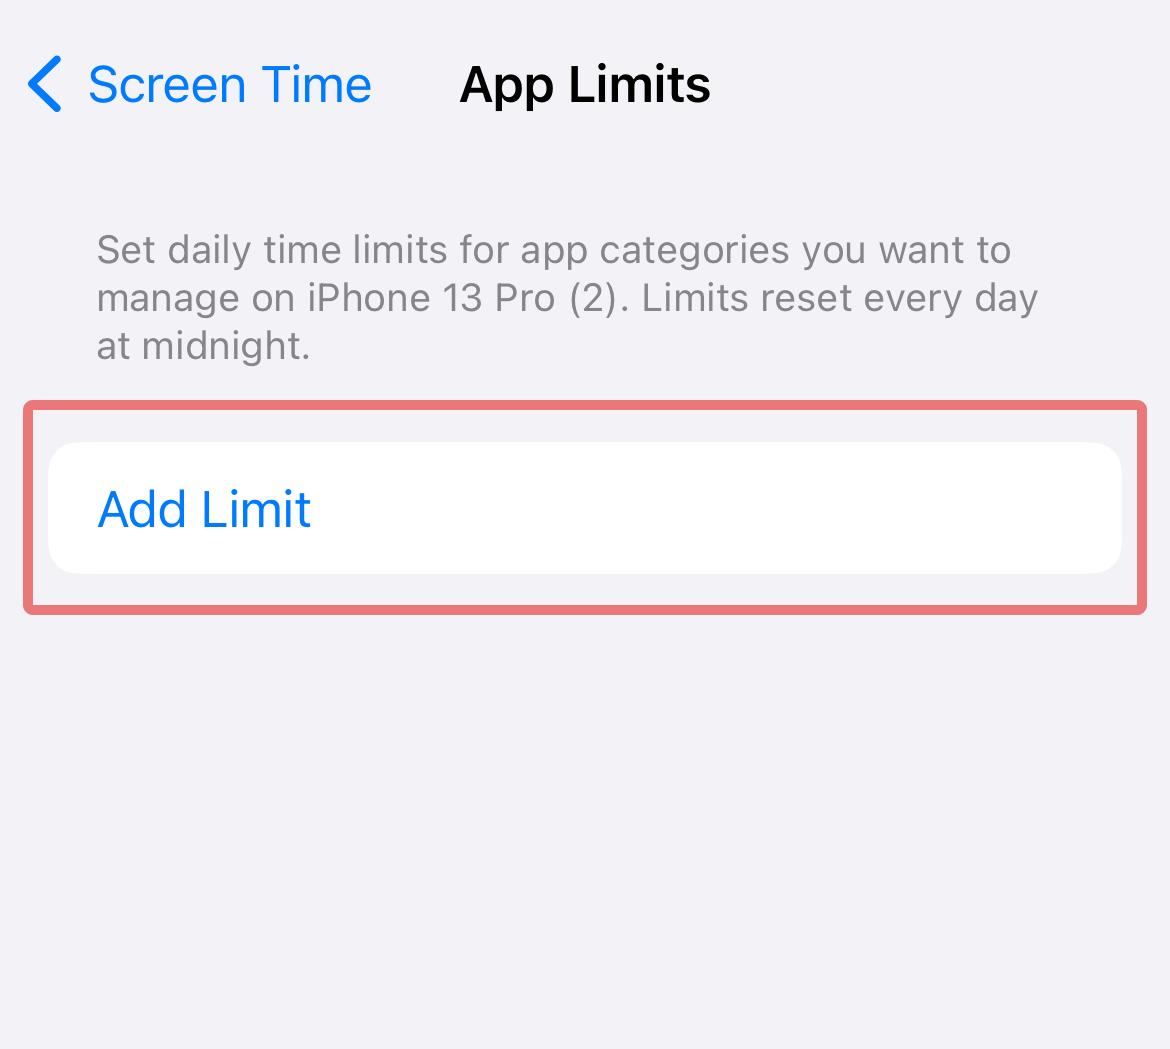 Add Limit button on App Limits page